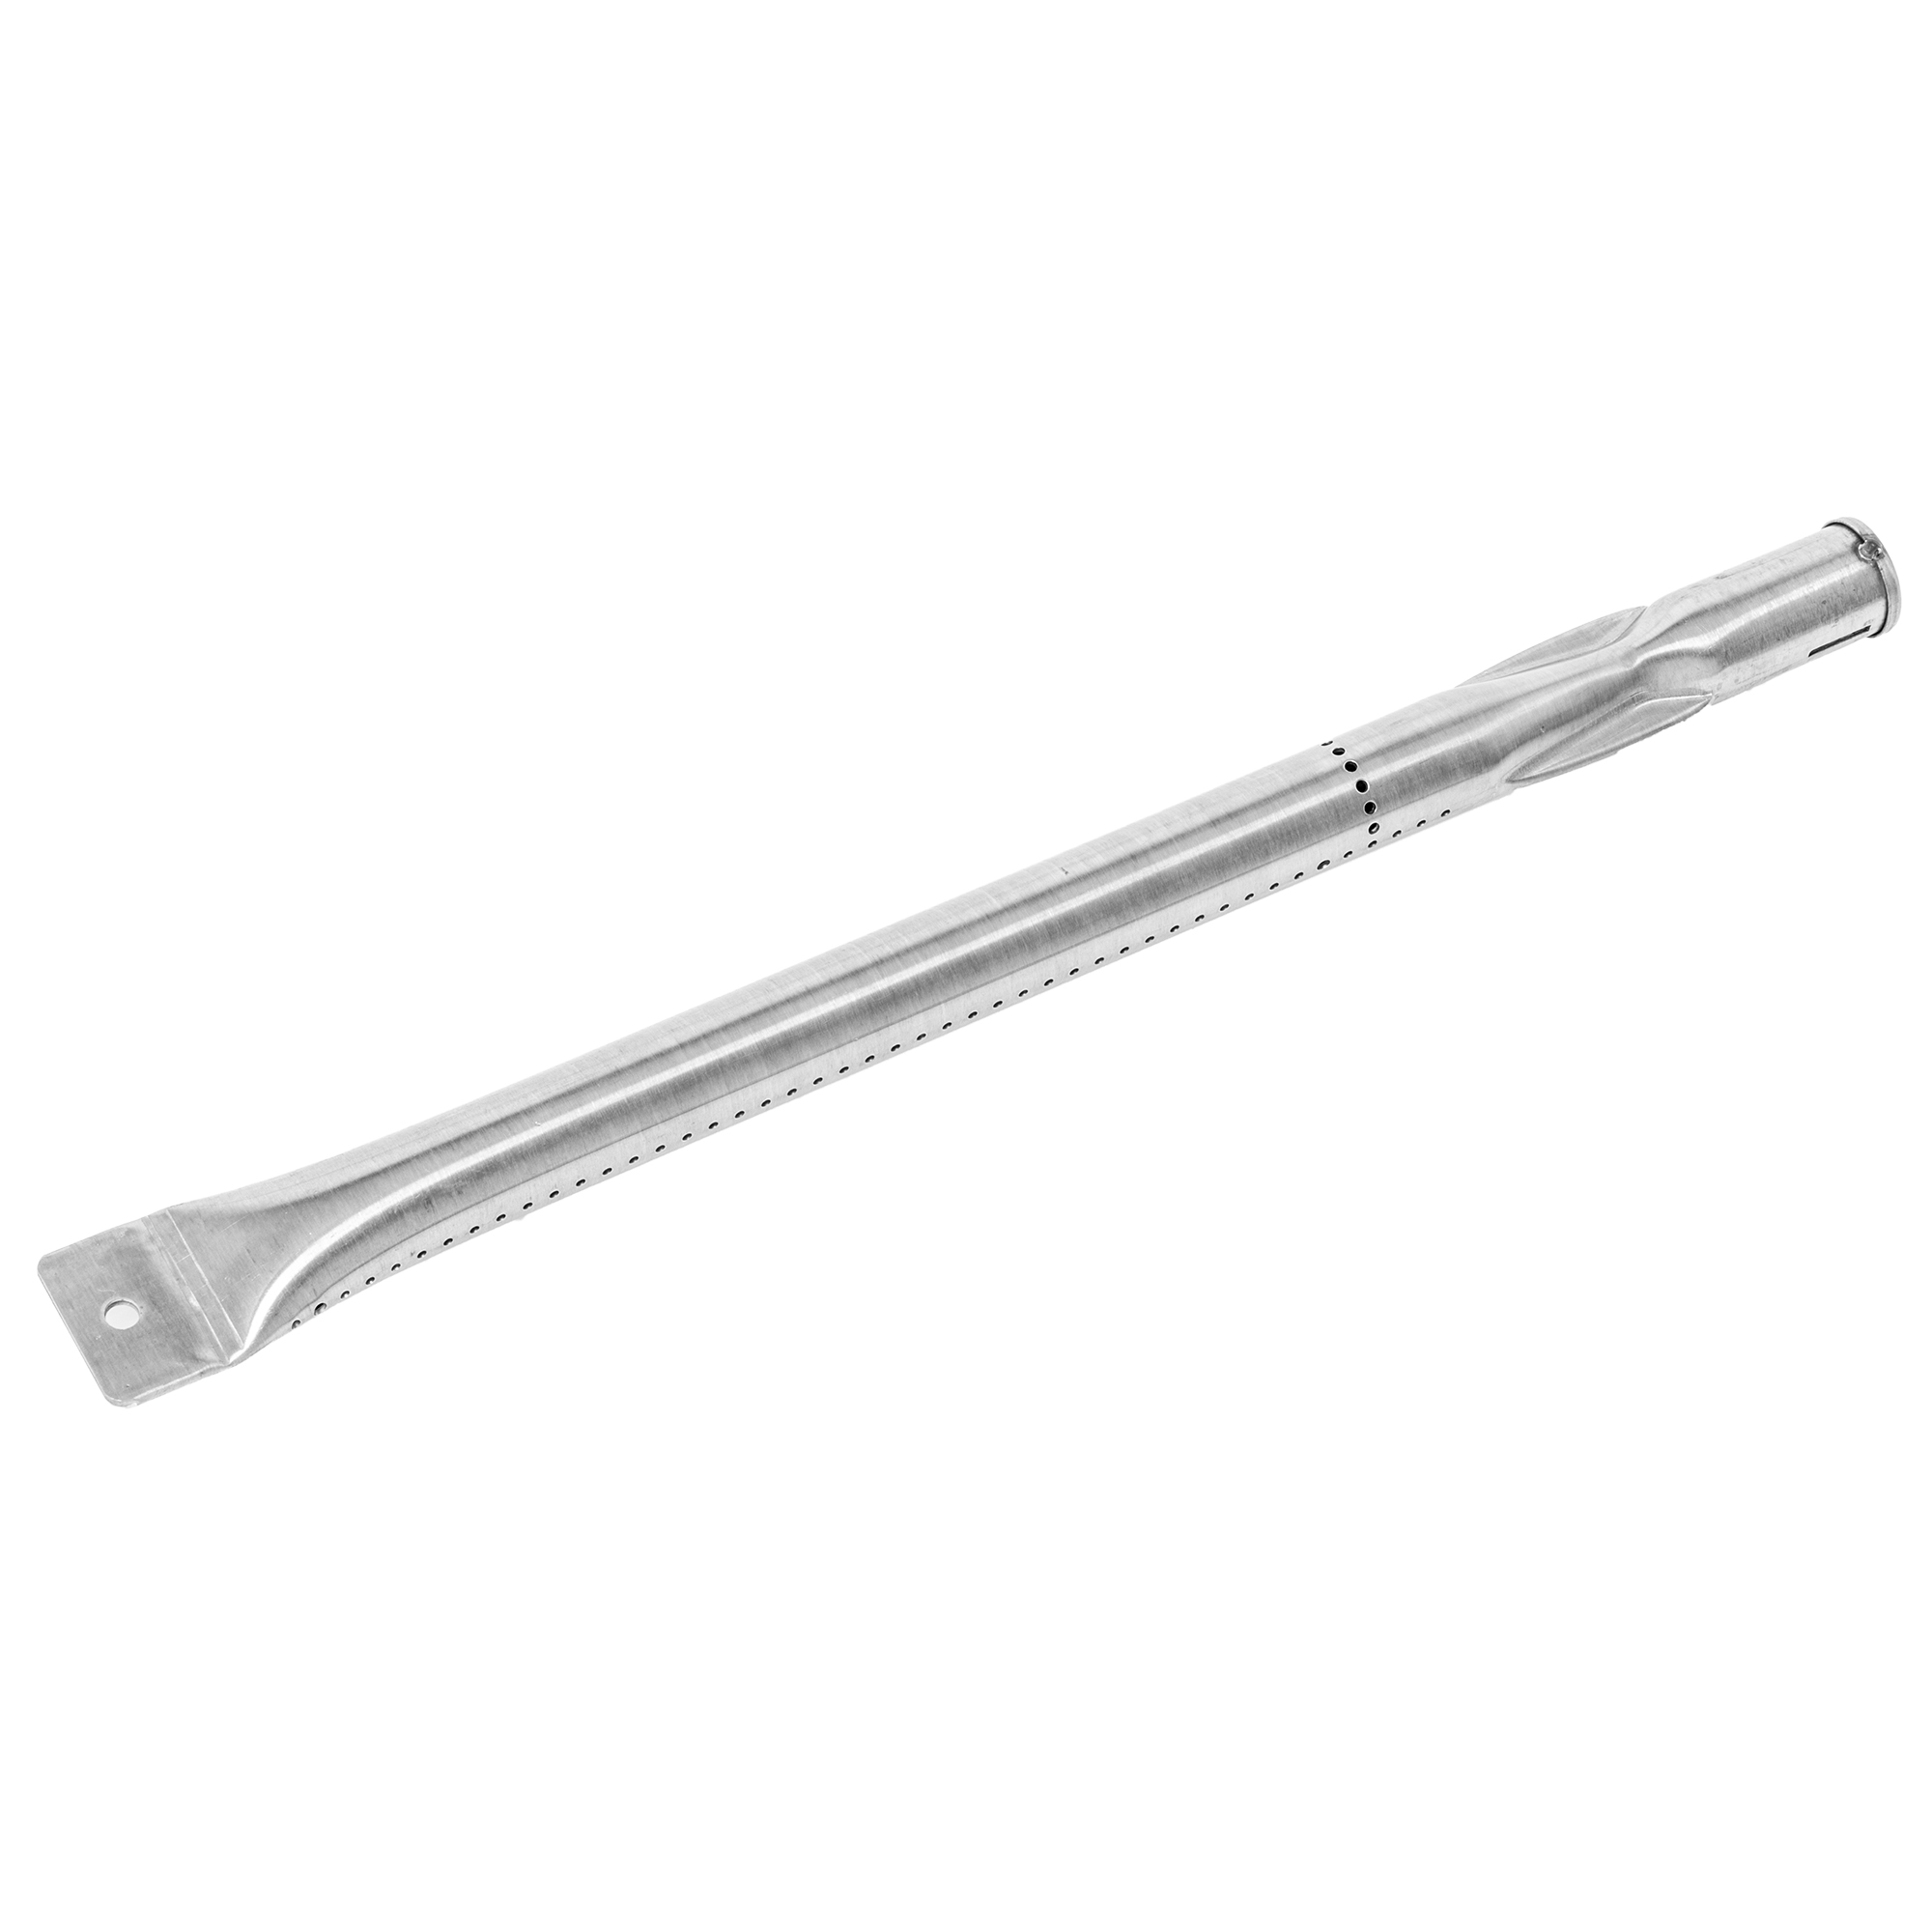 Stainless steel burner Magnum 50 mbar 1 pce